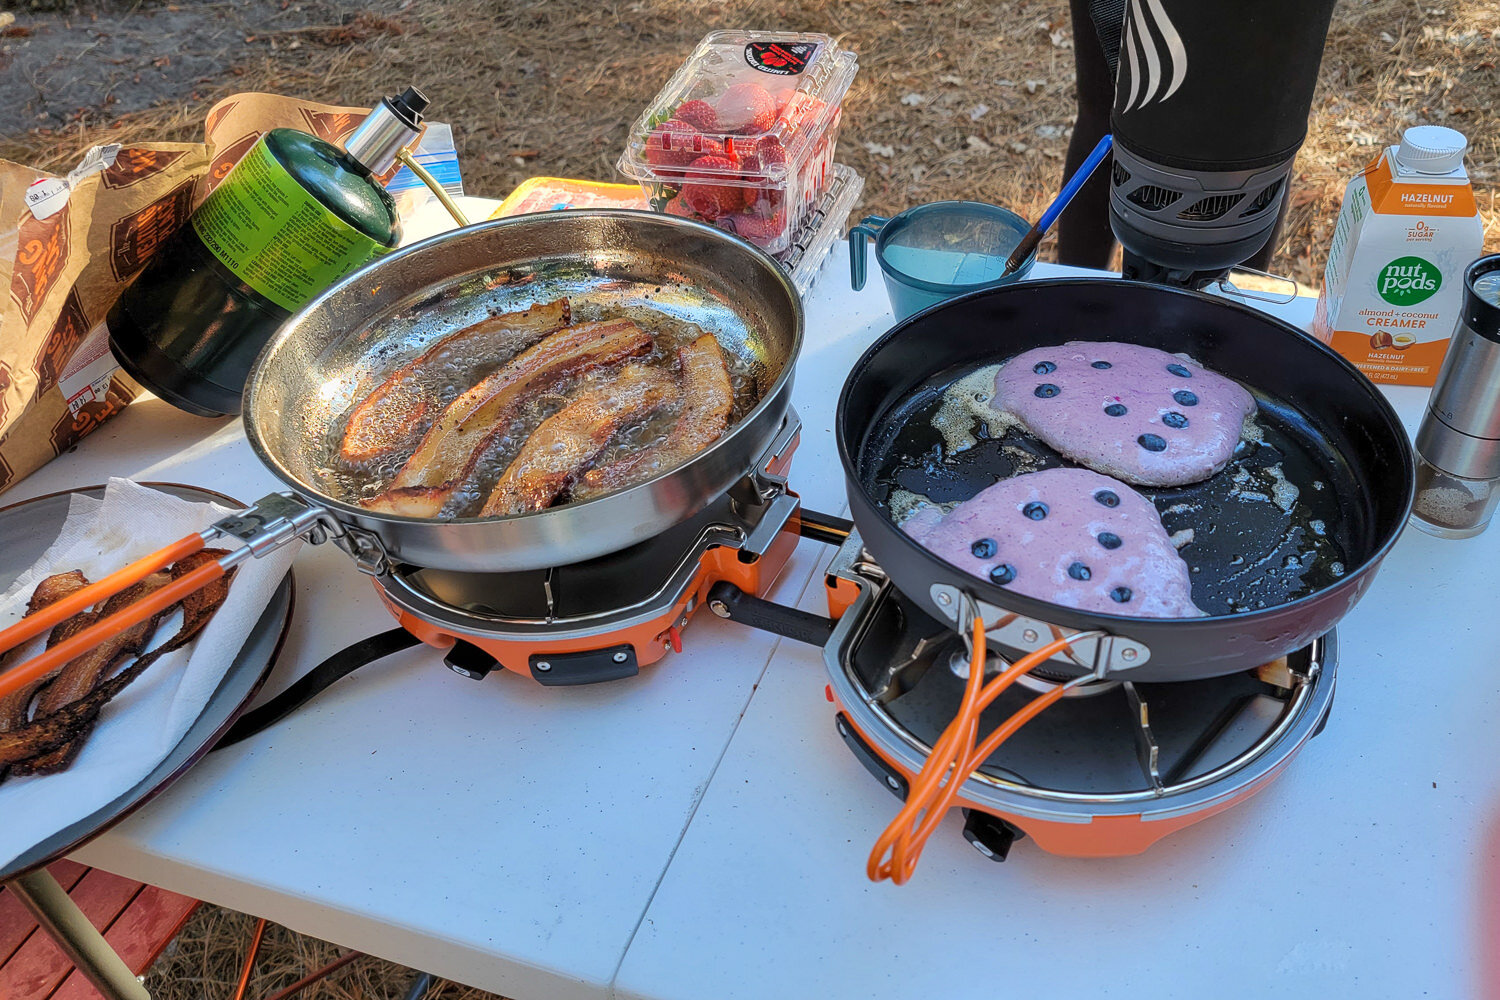 Cooking bacon & blueberry pancakes with the Jetboil Genesis Basecamp System